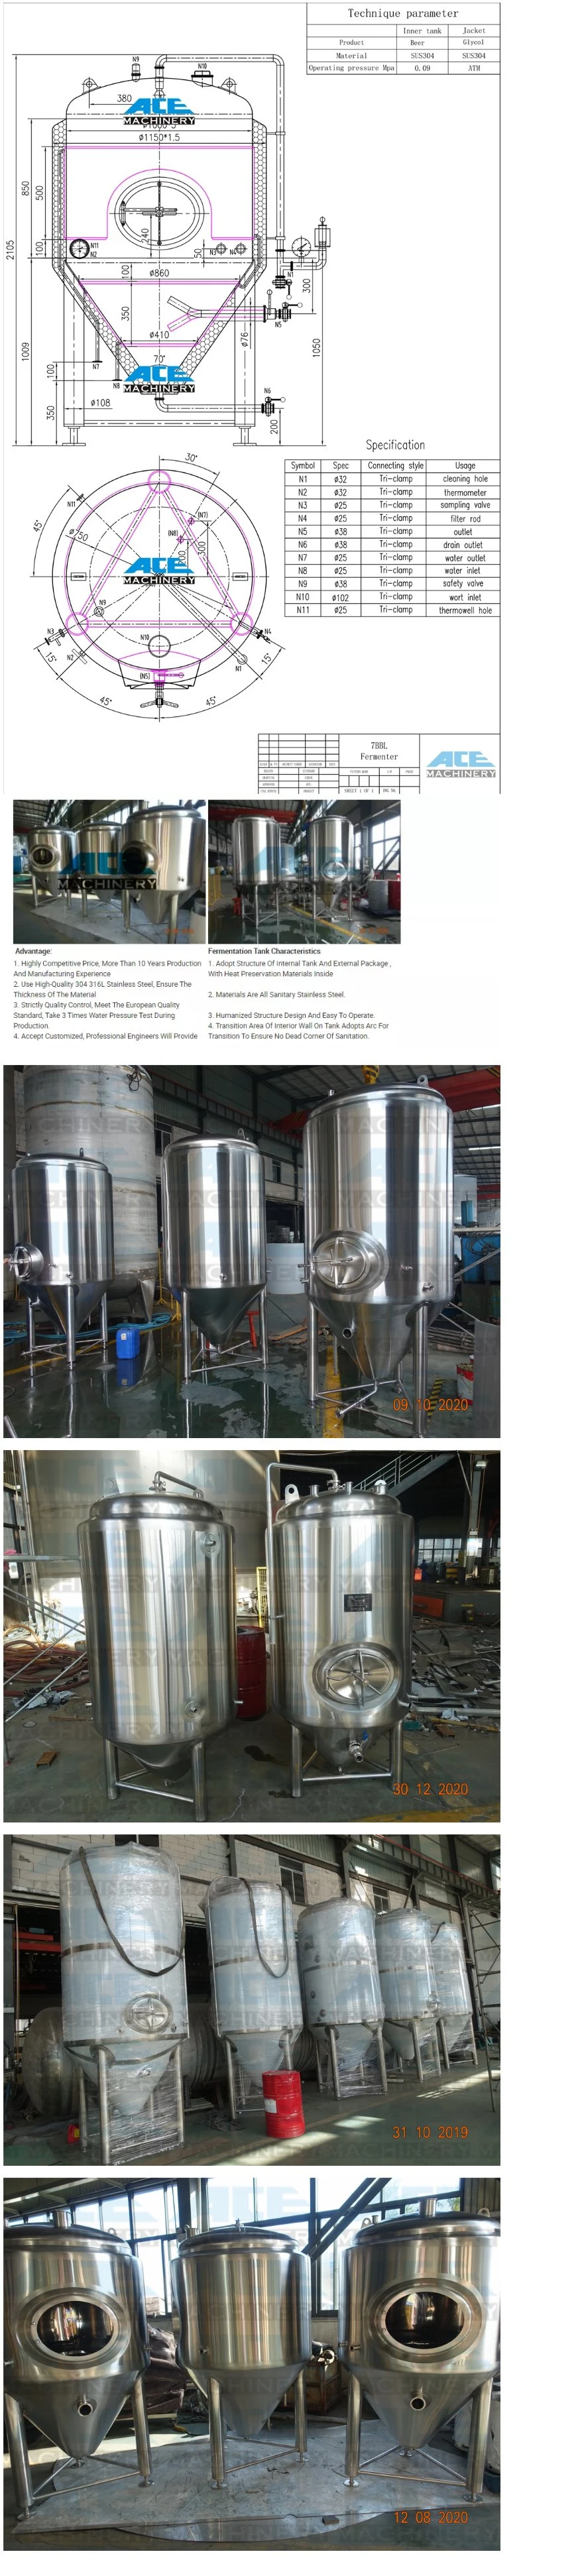 300L 500L1000L Stainless Steel Fermentation Beer Fermenting Equipment Micro Brewing Machine Turnkey Project for Sale